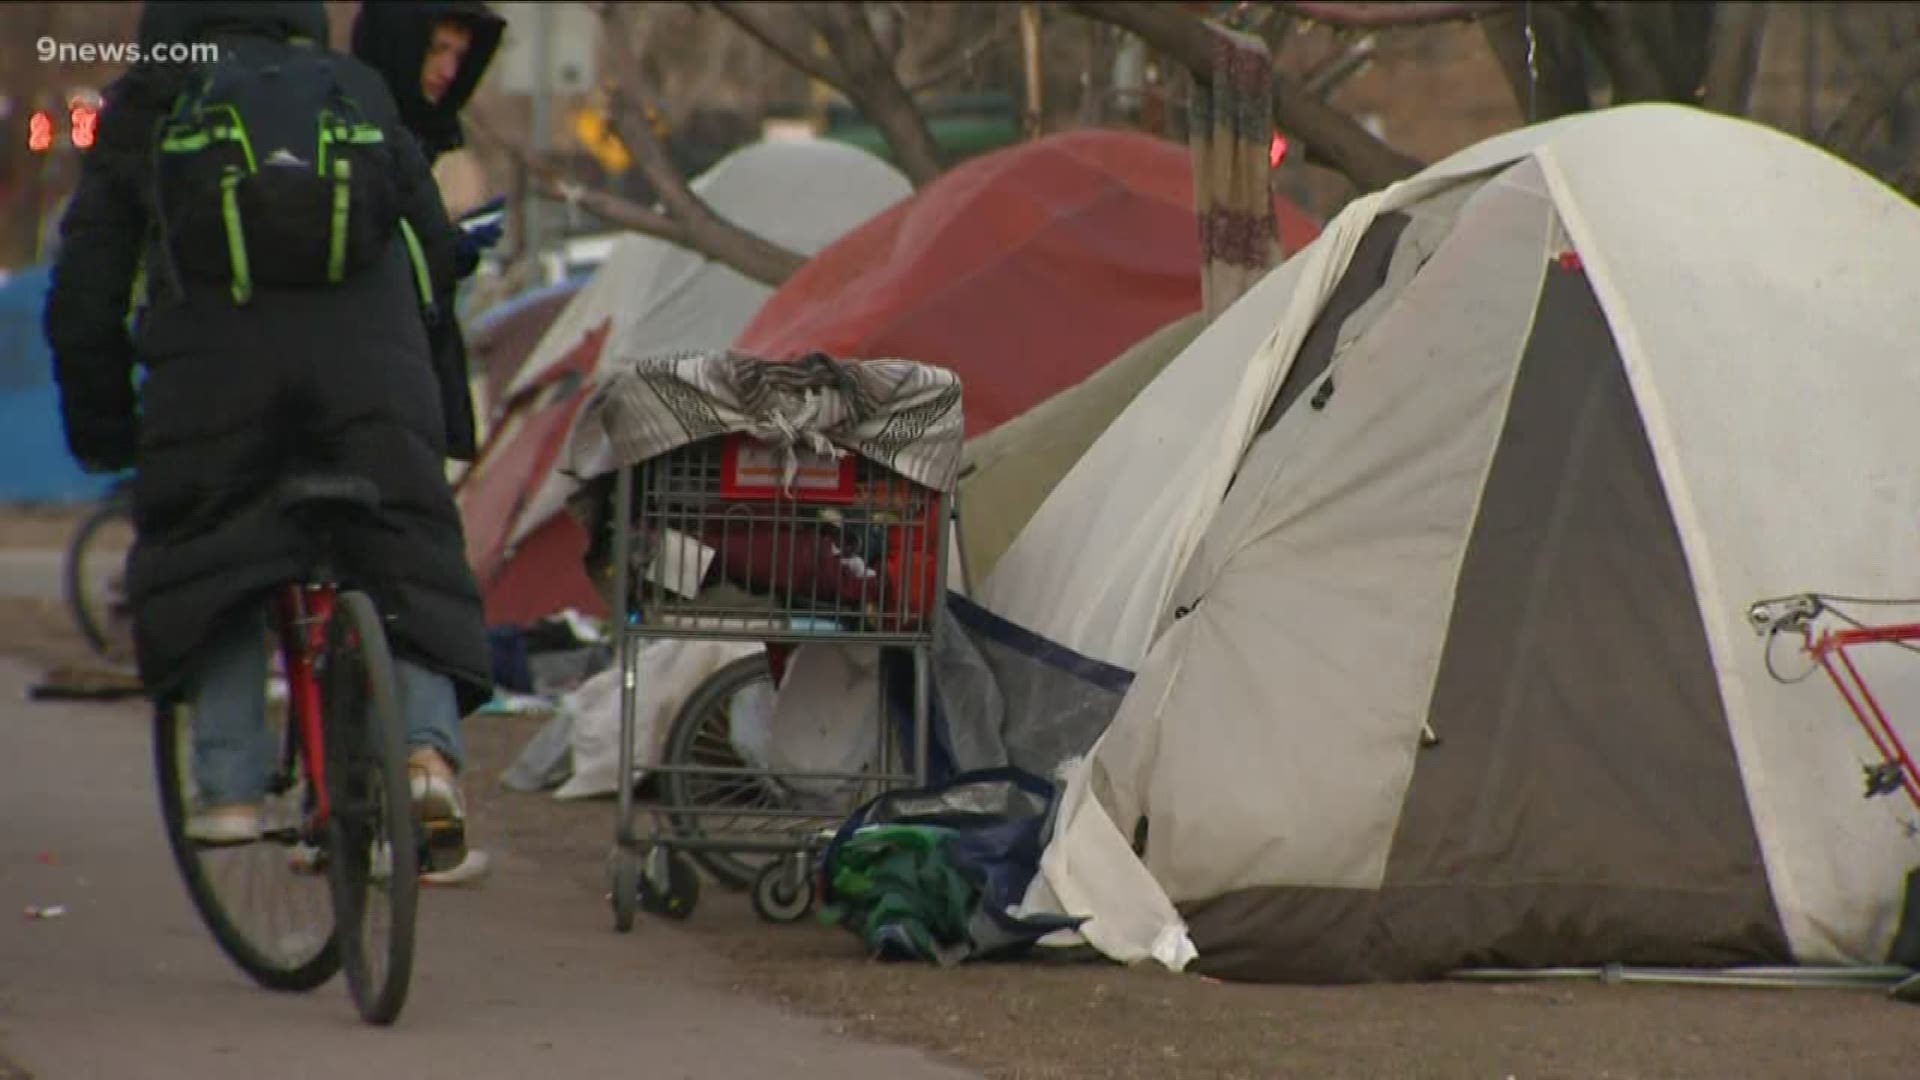 This comes after a Denver County Court judge ruled that the camping ban violated the Eighth Amendment.